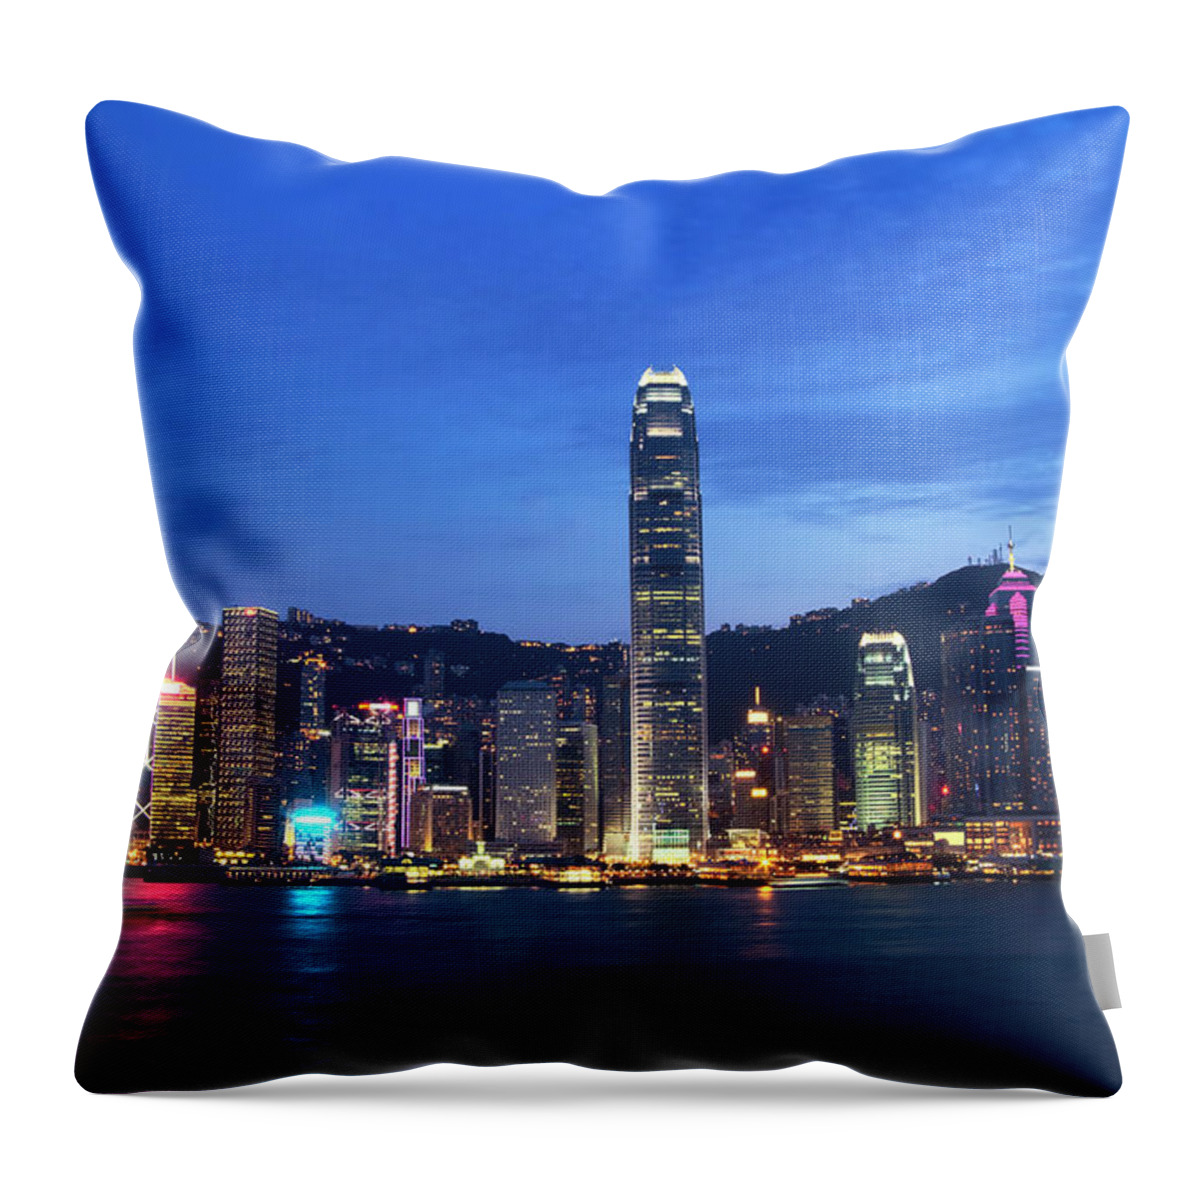 Chinese Culture Throw Pillow featuring the photograph Hong Kong Island At Night by Yuenwu